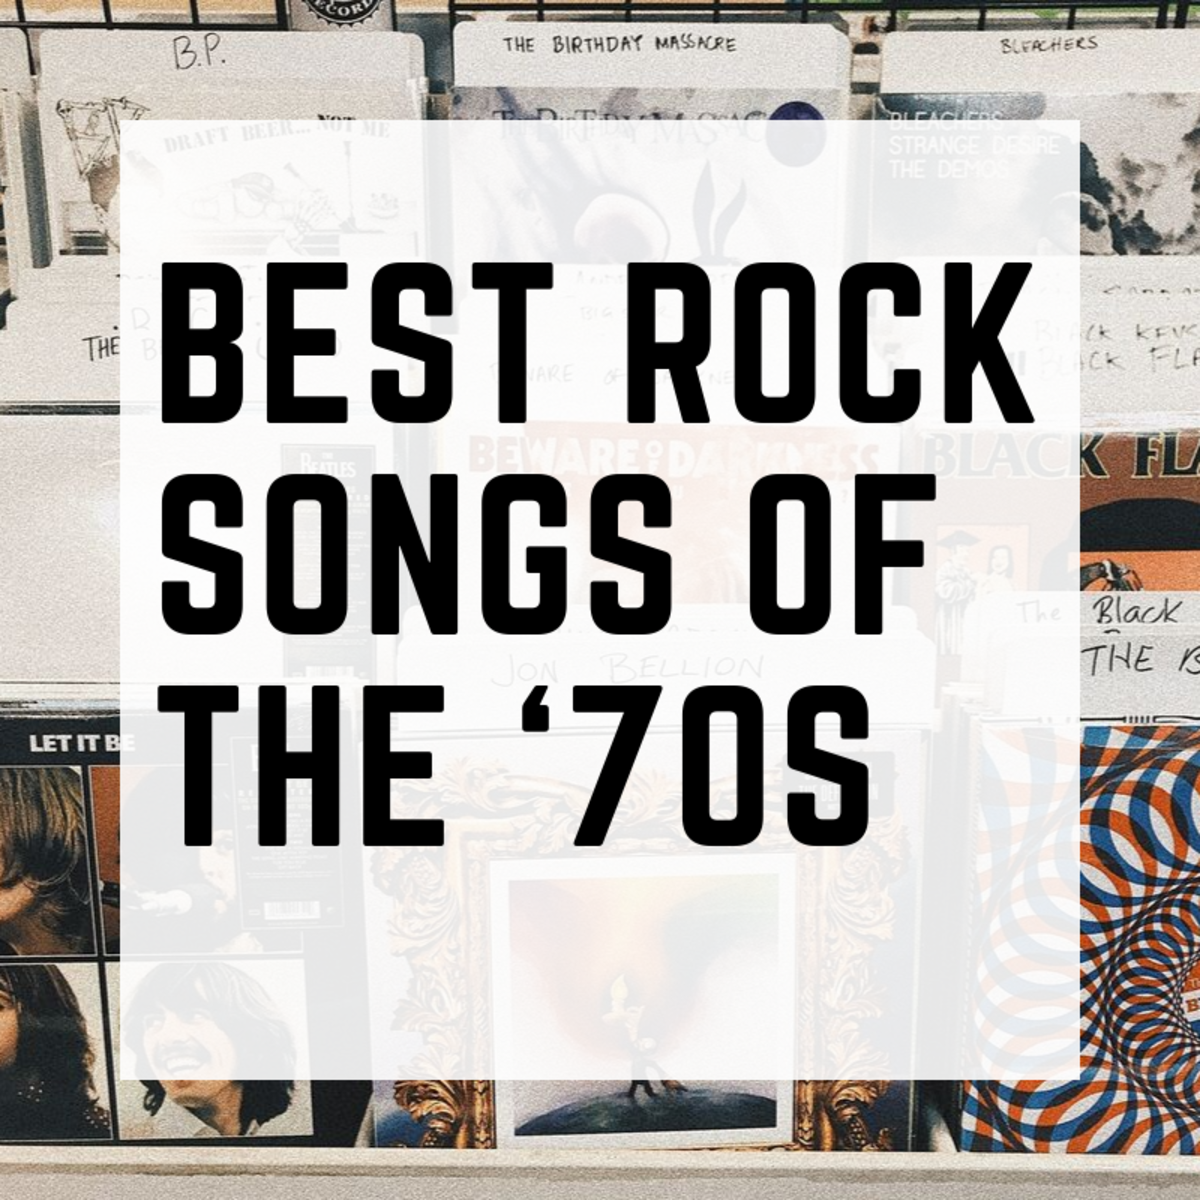 The ‘70s were epic for rock music. This list shows the very best the decade had to offer.